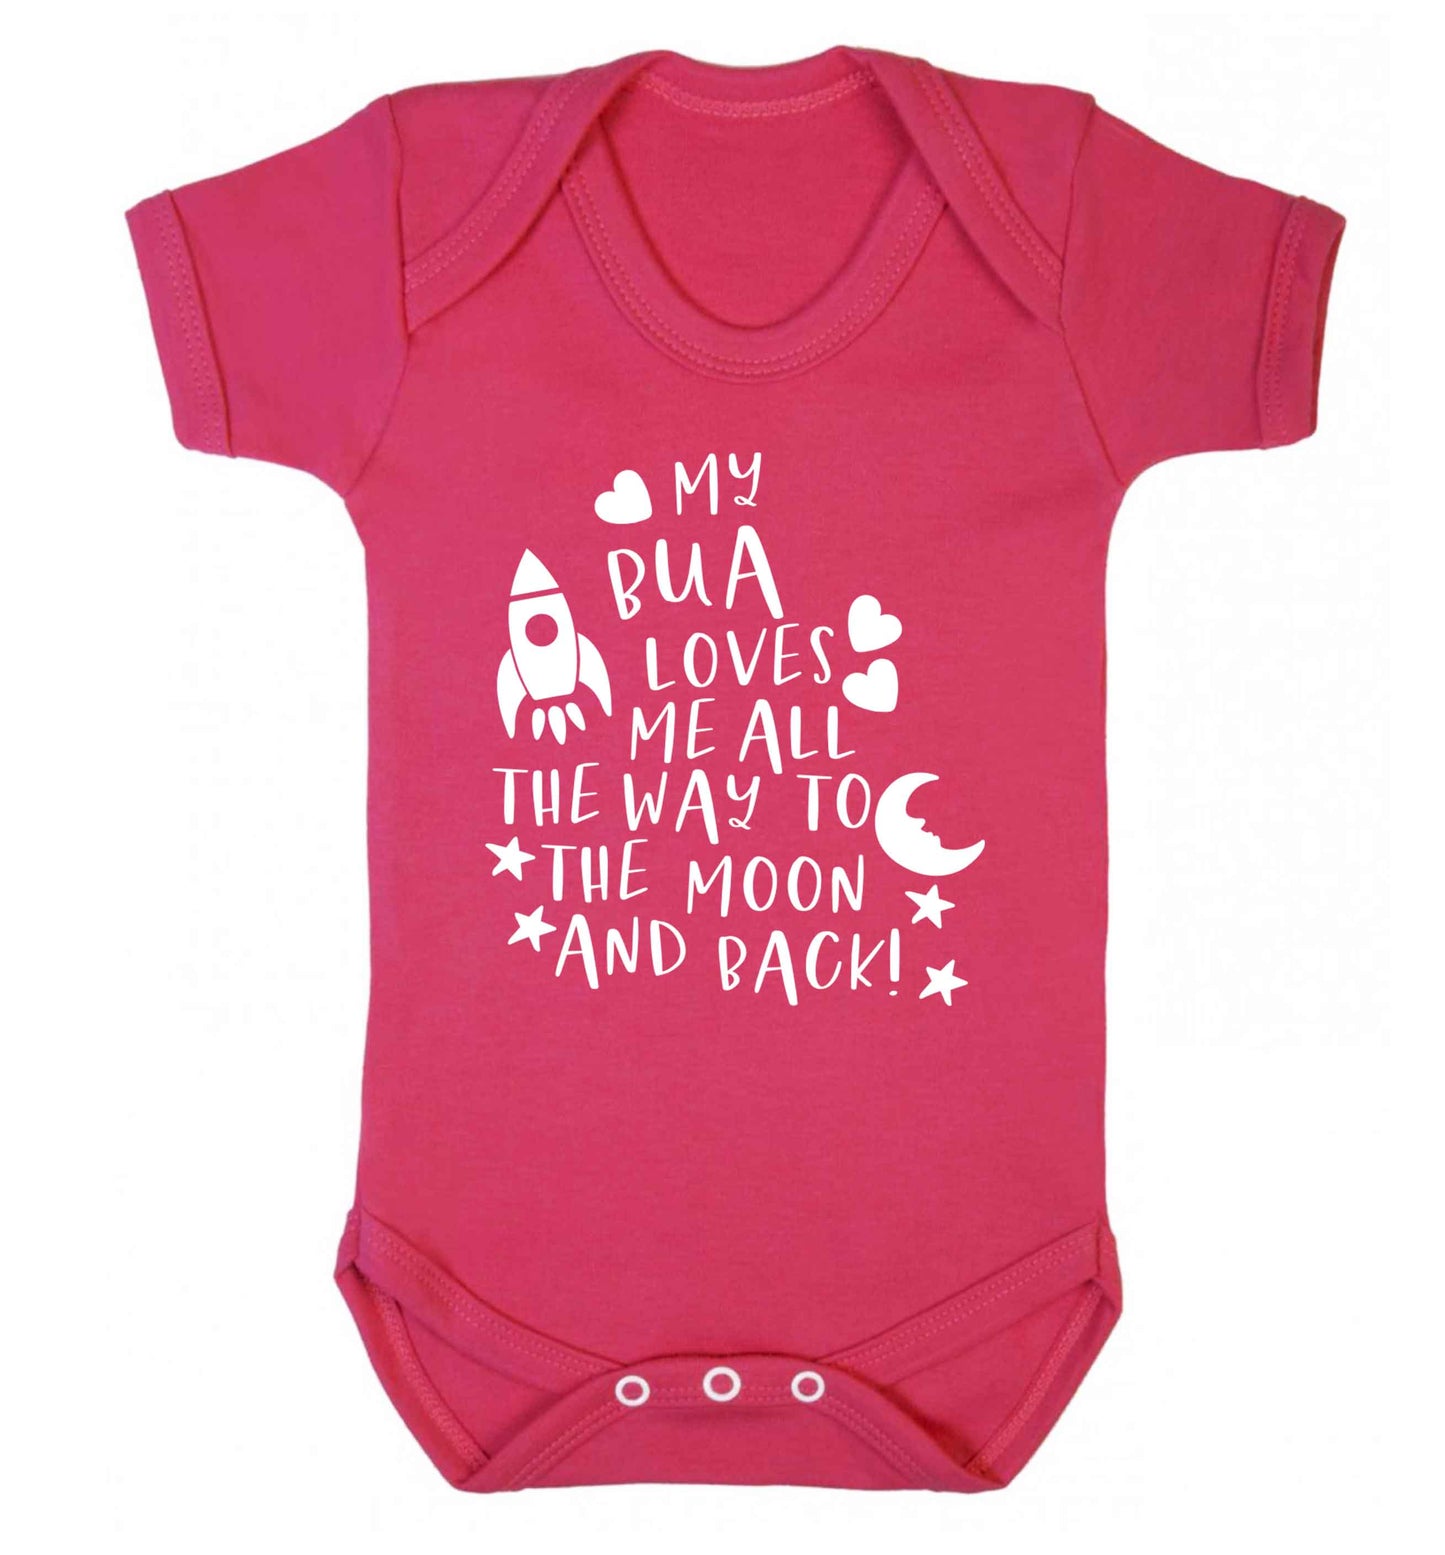 My bua loves me all they way to the moon and back Baby Vest dark pink 18-24 months